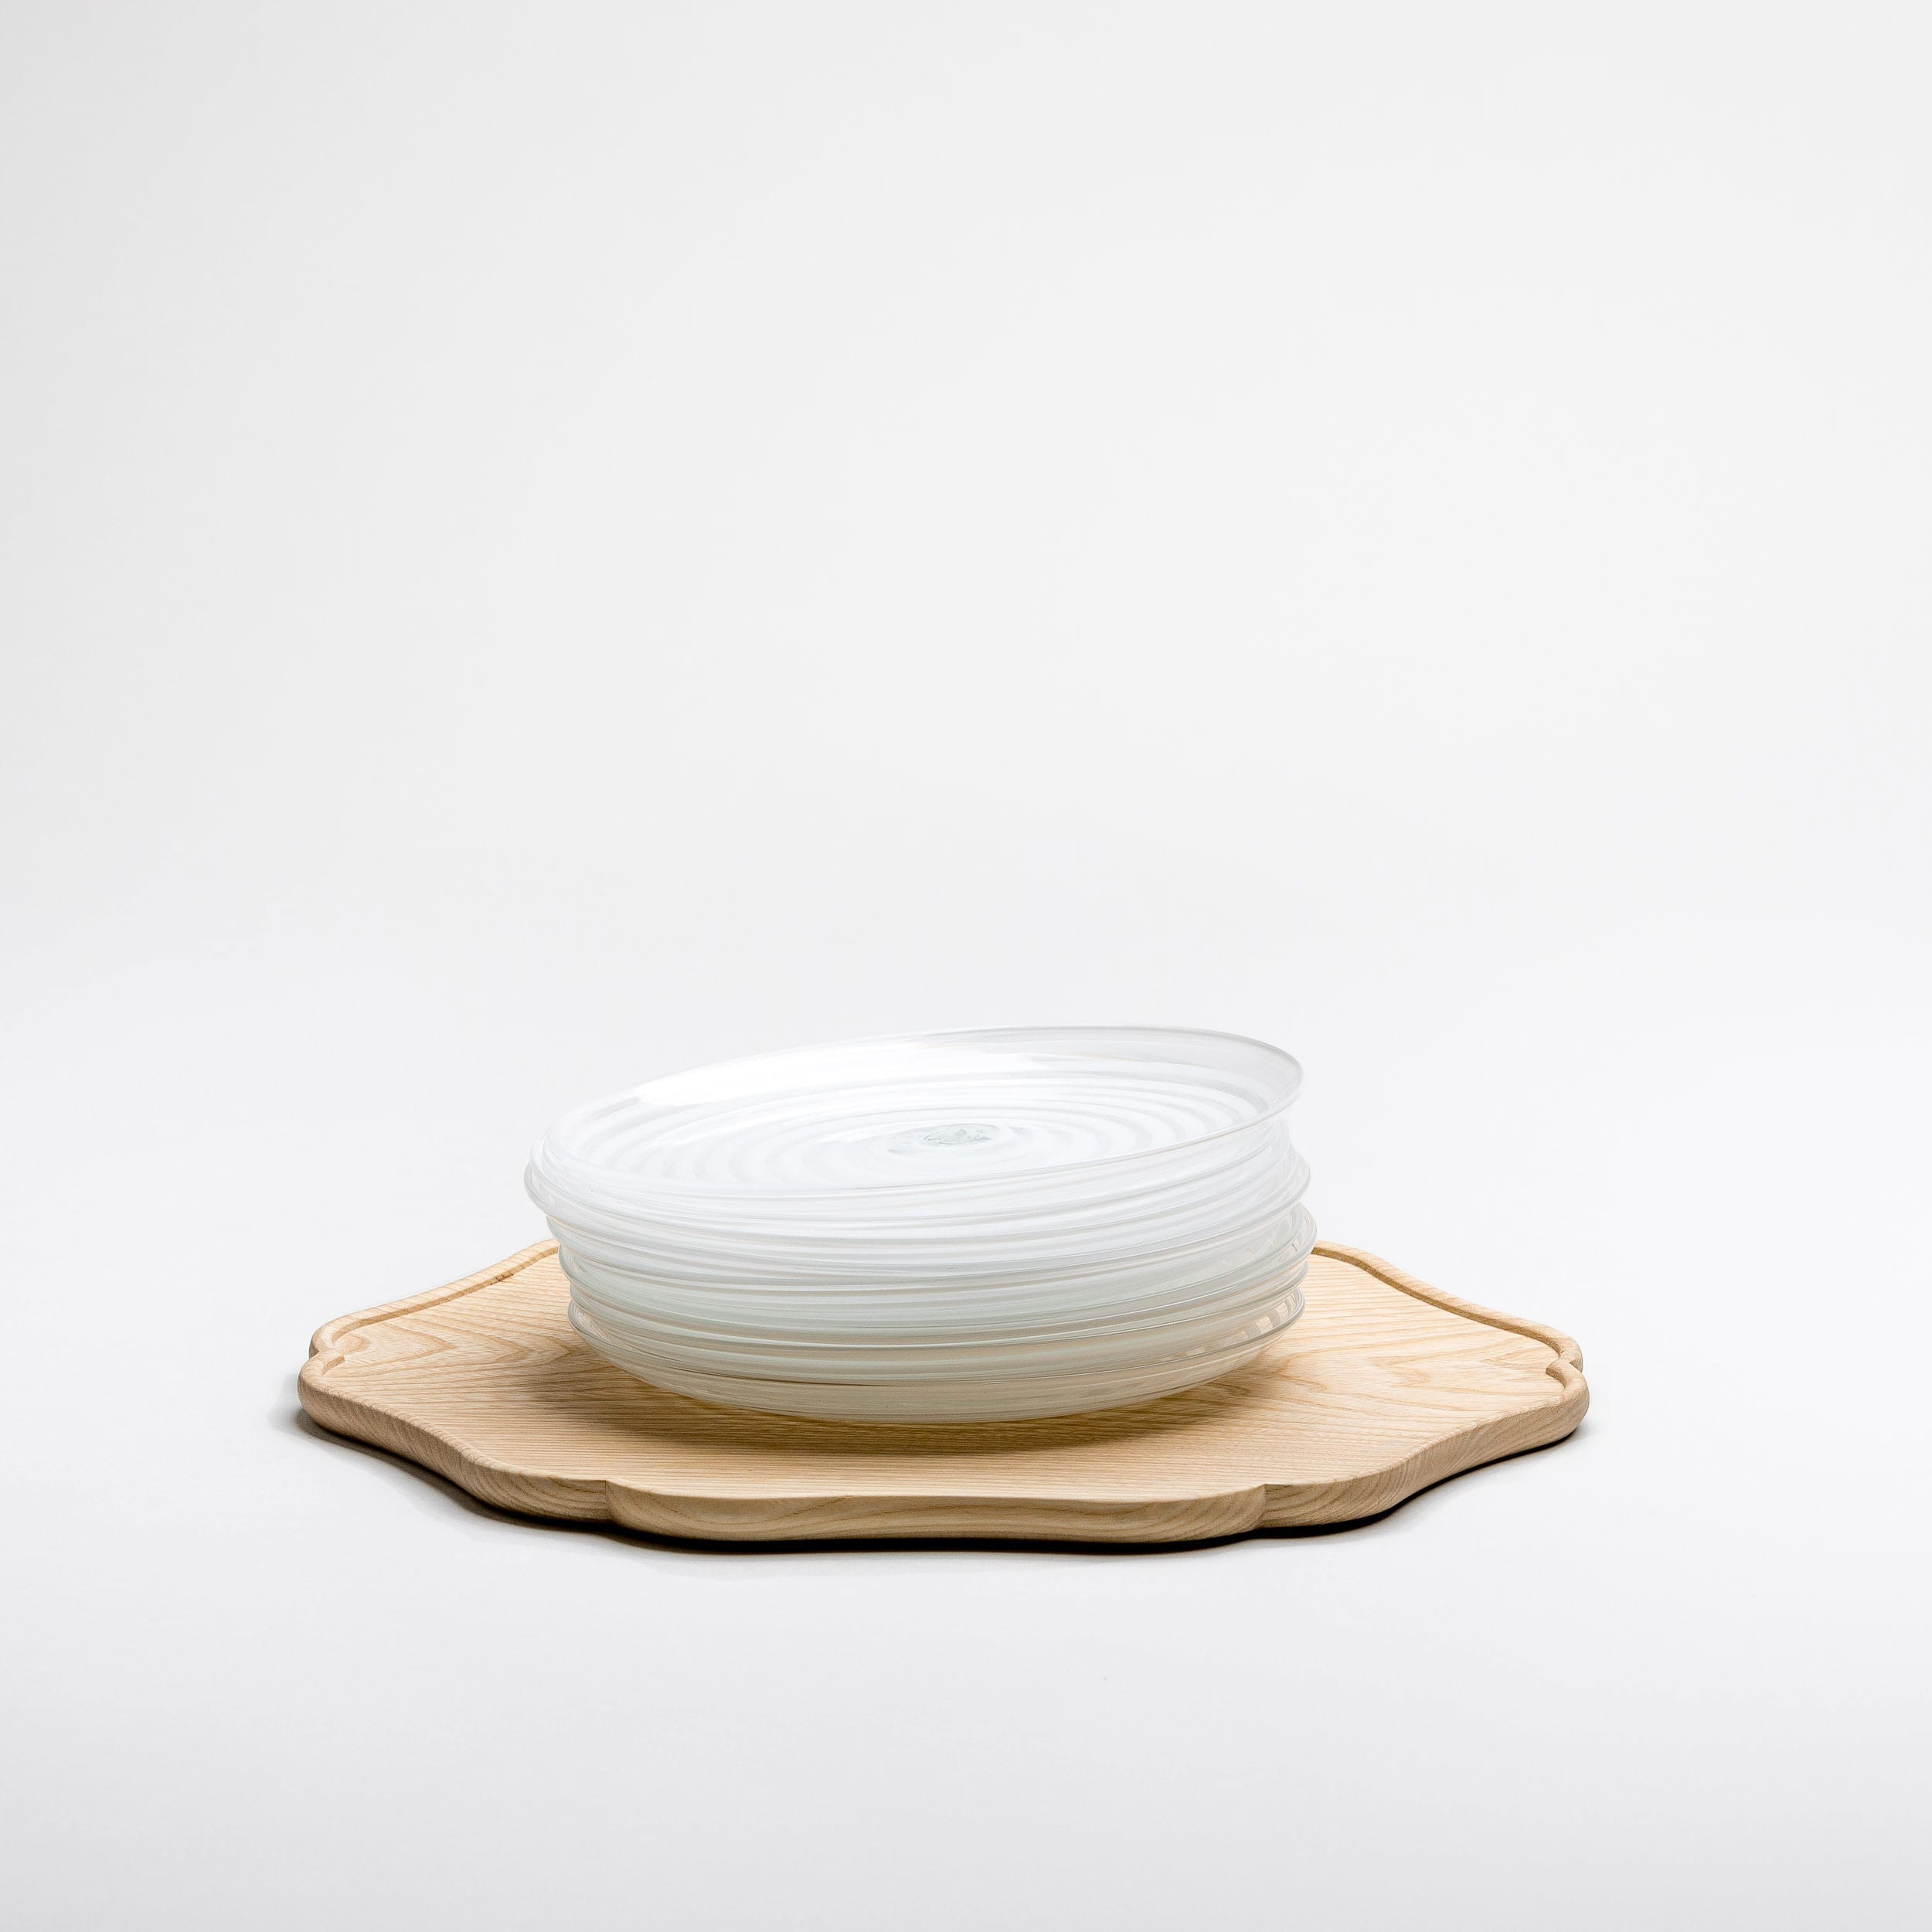 YALI A NASTRO SIDE PLATE WHITE